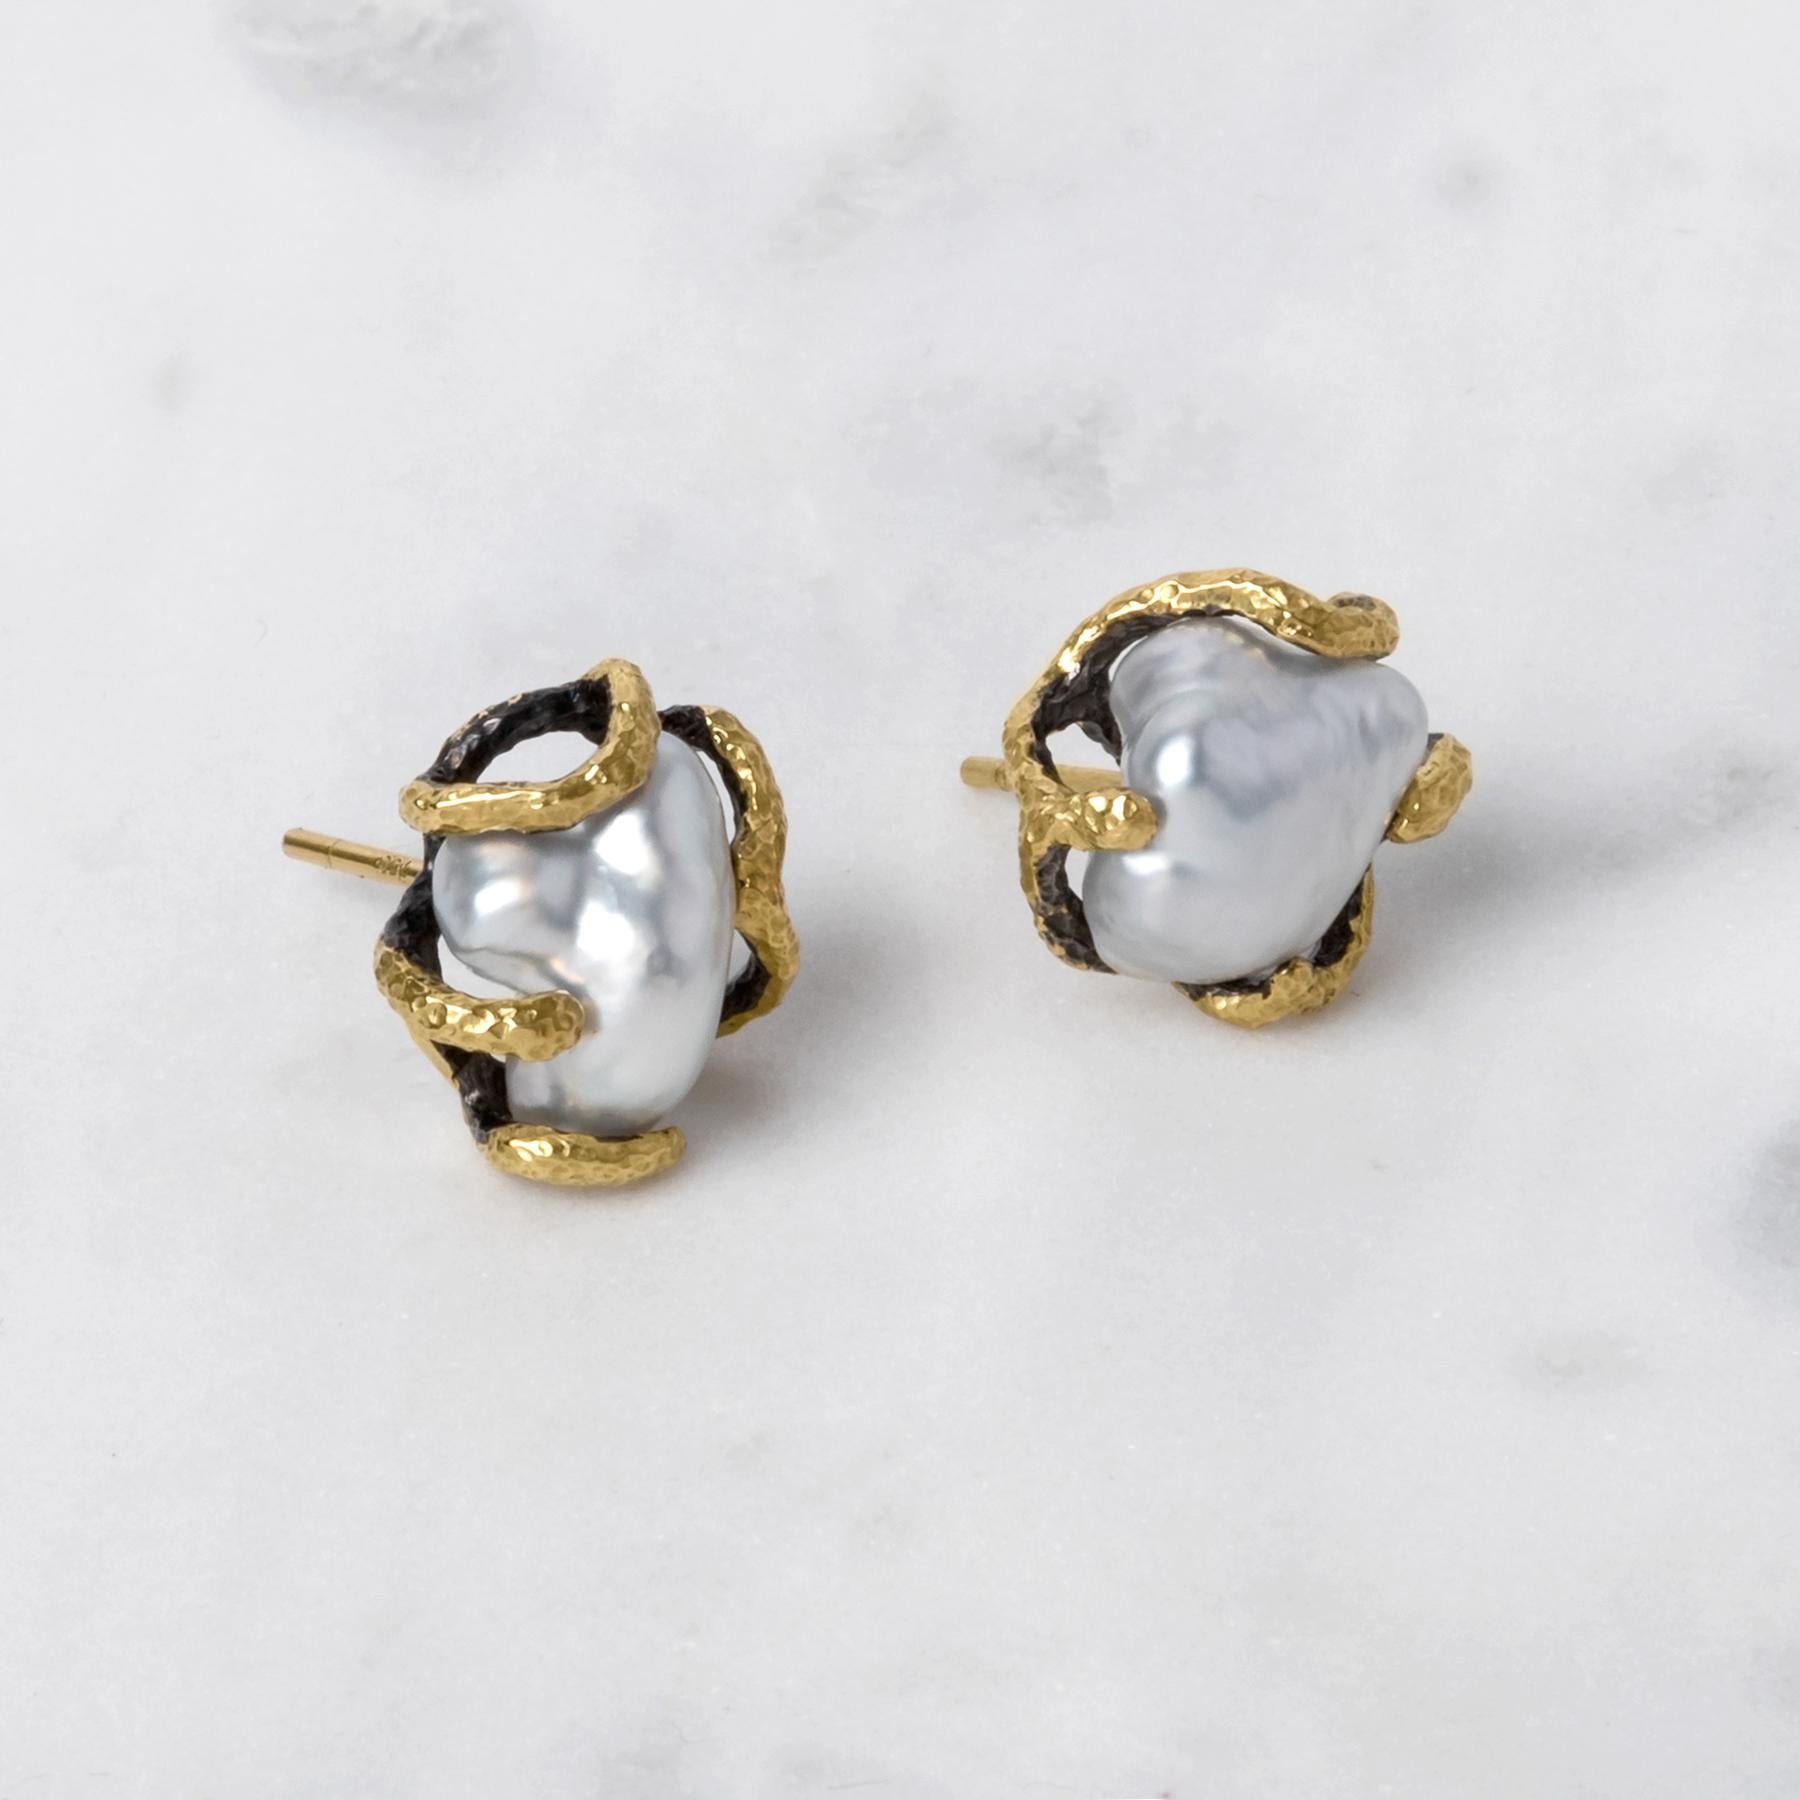 This one of a kind pair of earrings are from Lingjun's 'FISSURE' collection, featuring white Australian South Sea Keshi pearls. 

The unique organic lines of gold were custom carved to match the pearls' natural shapes, allowing their audience to